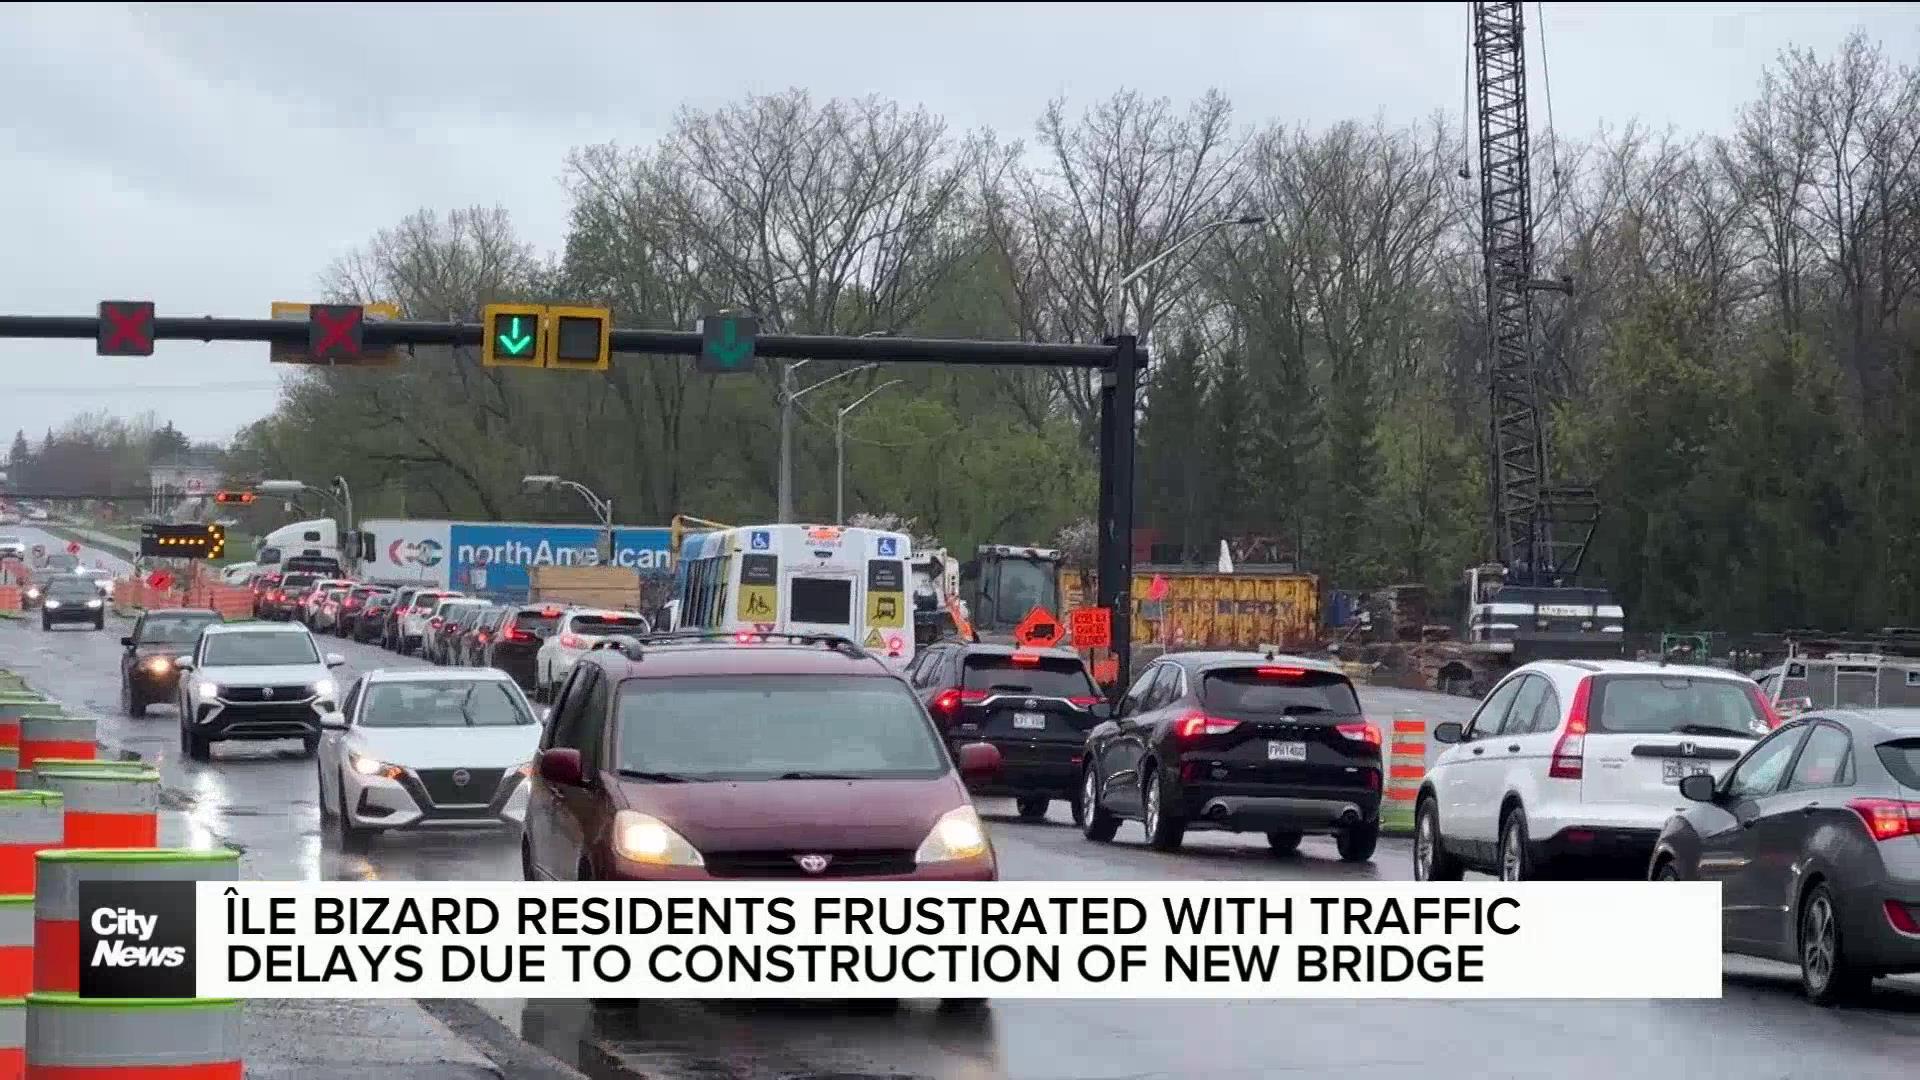 Residents of Île Bizard frustrated amid construction of new bridge